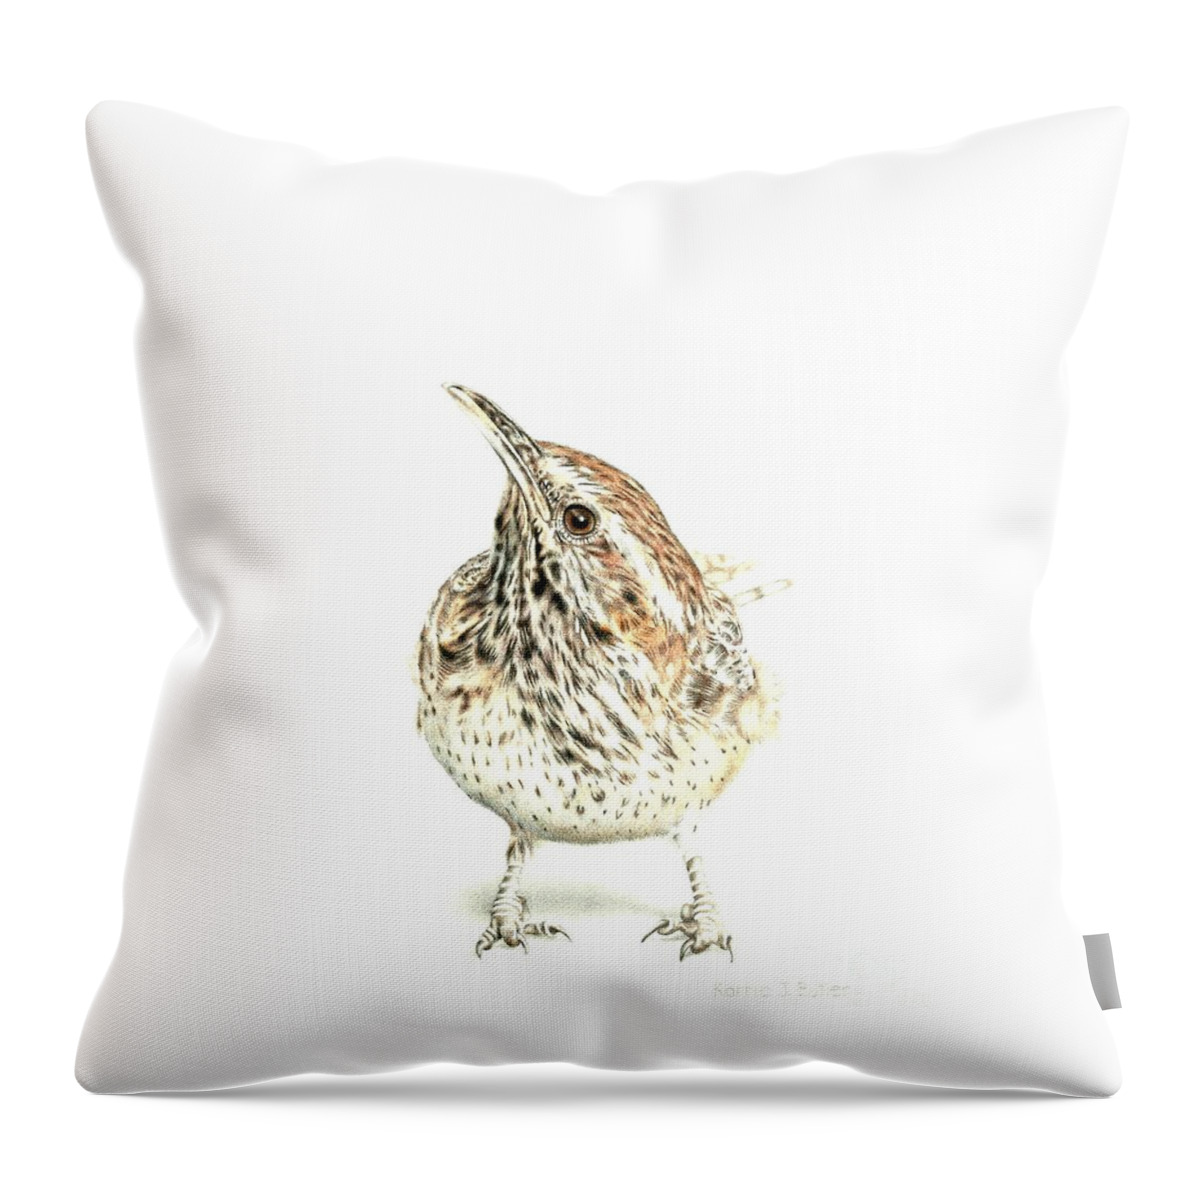 Arizona Throw Pillow featuring the drawing Arizona State Bird by Karrie J Butler